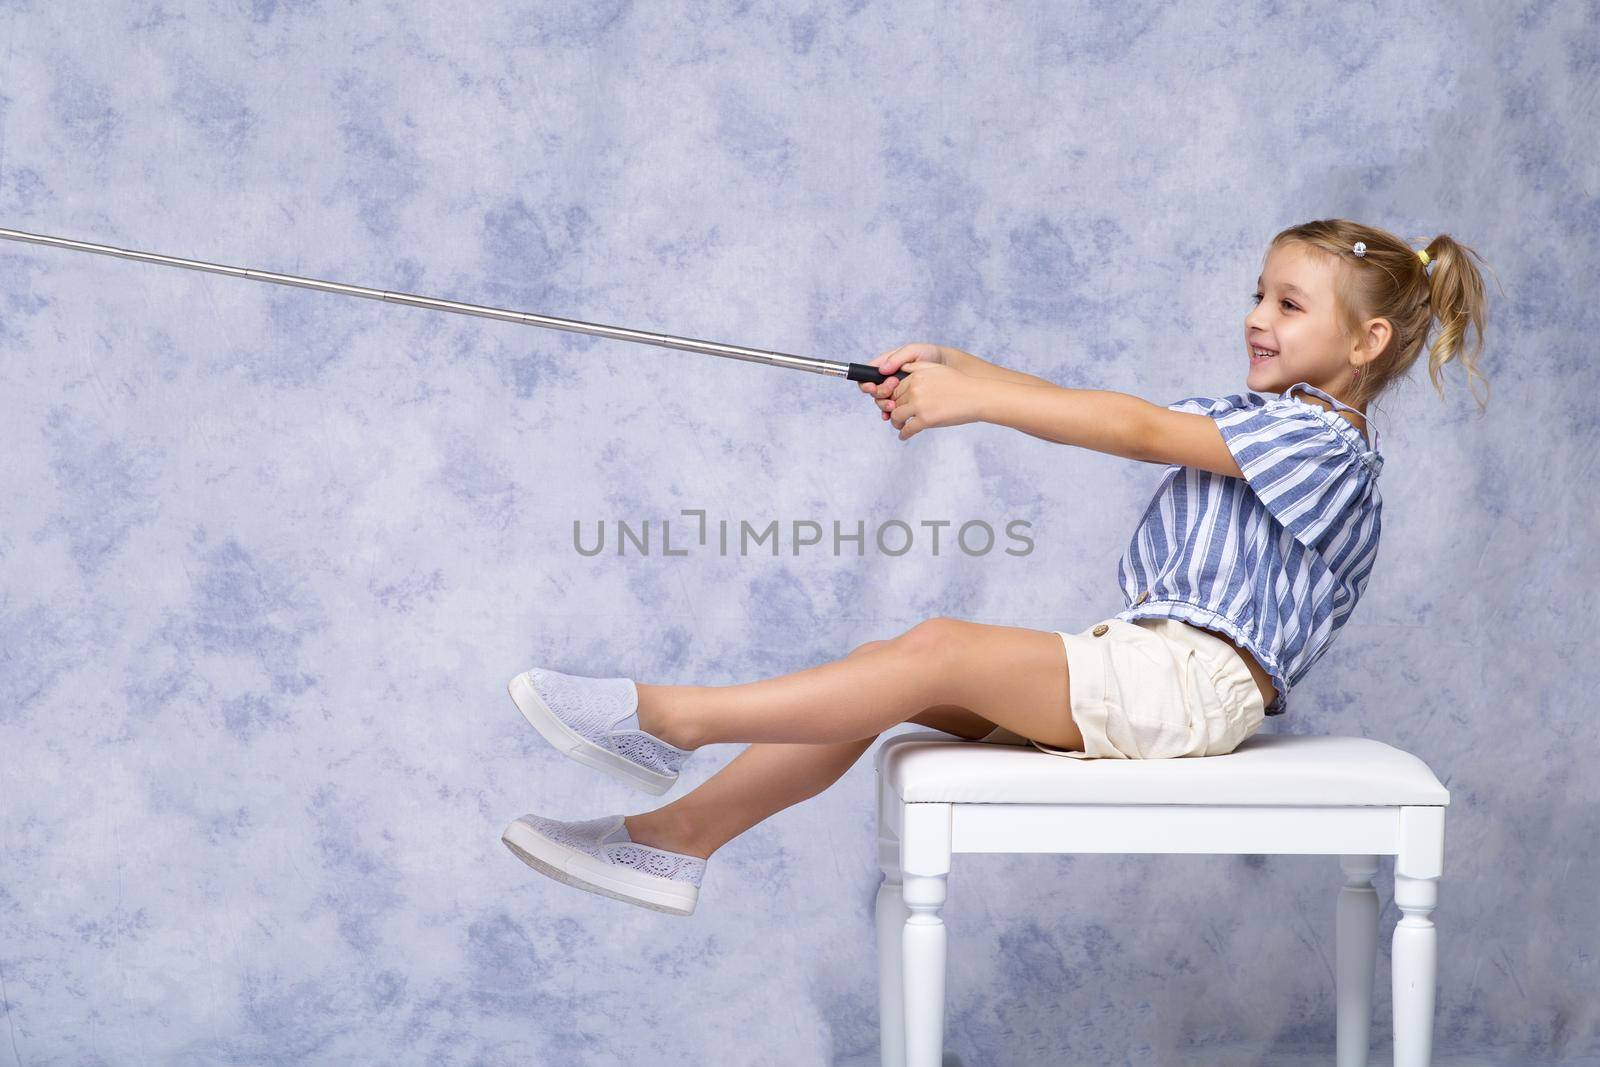 A cute little girl attracts attention by pointing at something with her stick. Simulates fishing with a rod. The concept of advertising goods and services. Isolated on white